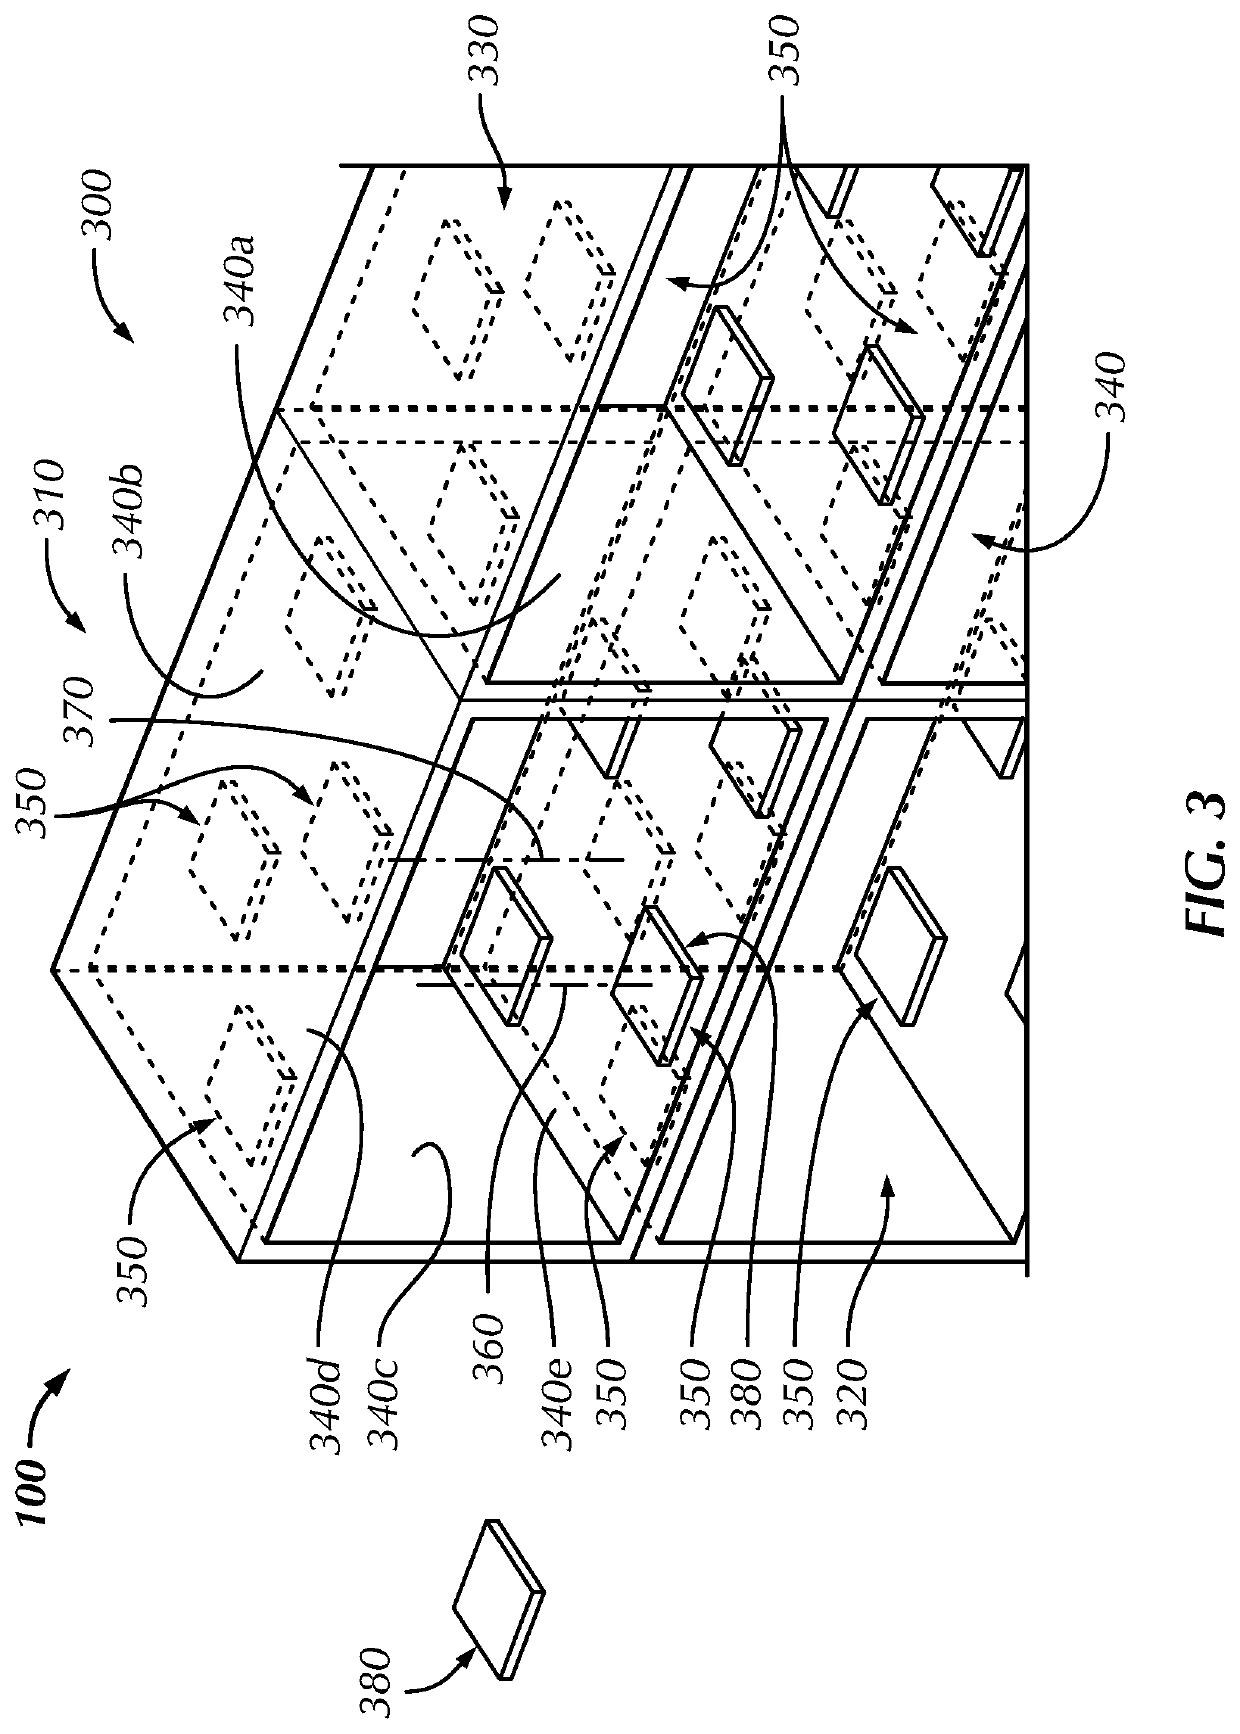 Surgical product supply system and method